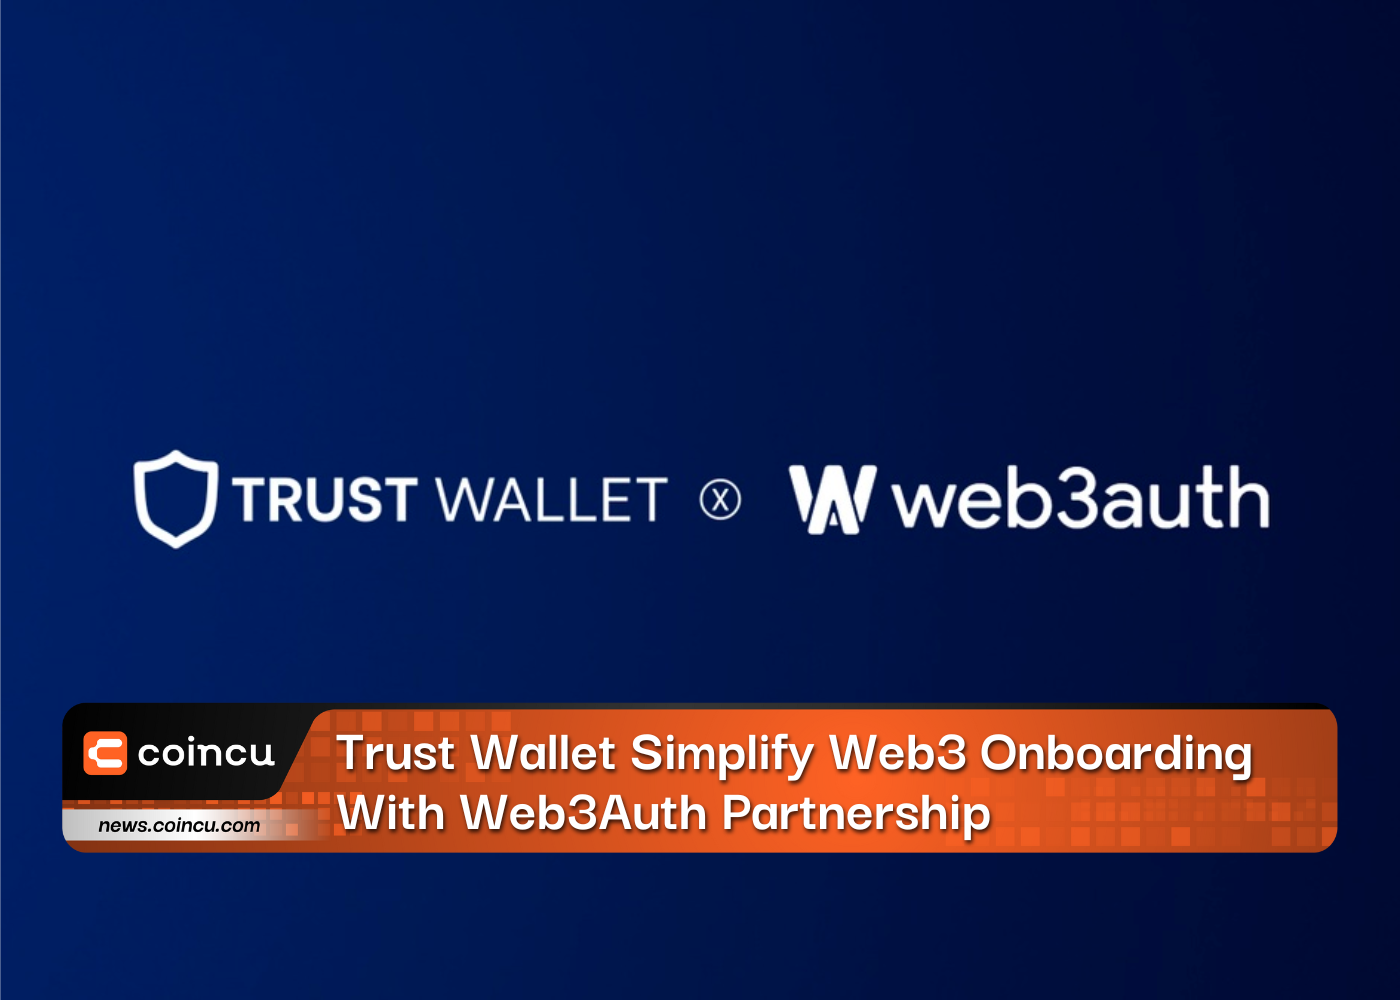 Trust Wallet Simplify Web3 Onboarding With Web3Auth Partnership